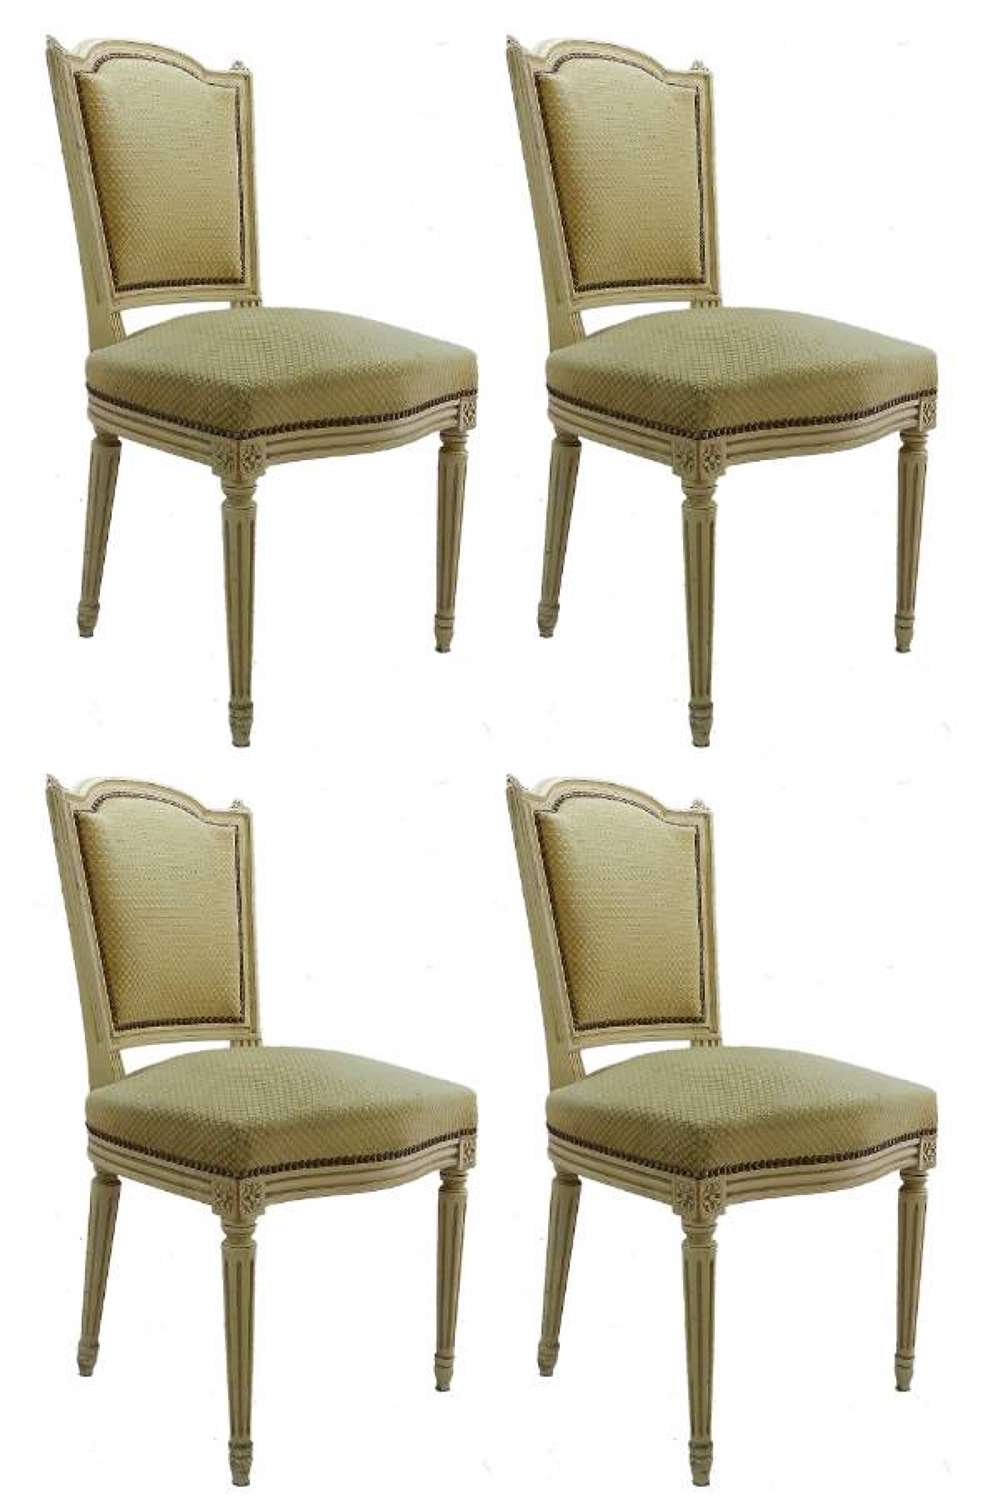 Four French Dining Chairs c1920 Louis XVI Revival Original Paint Uphol